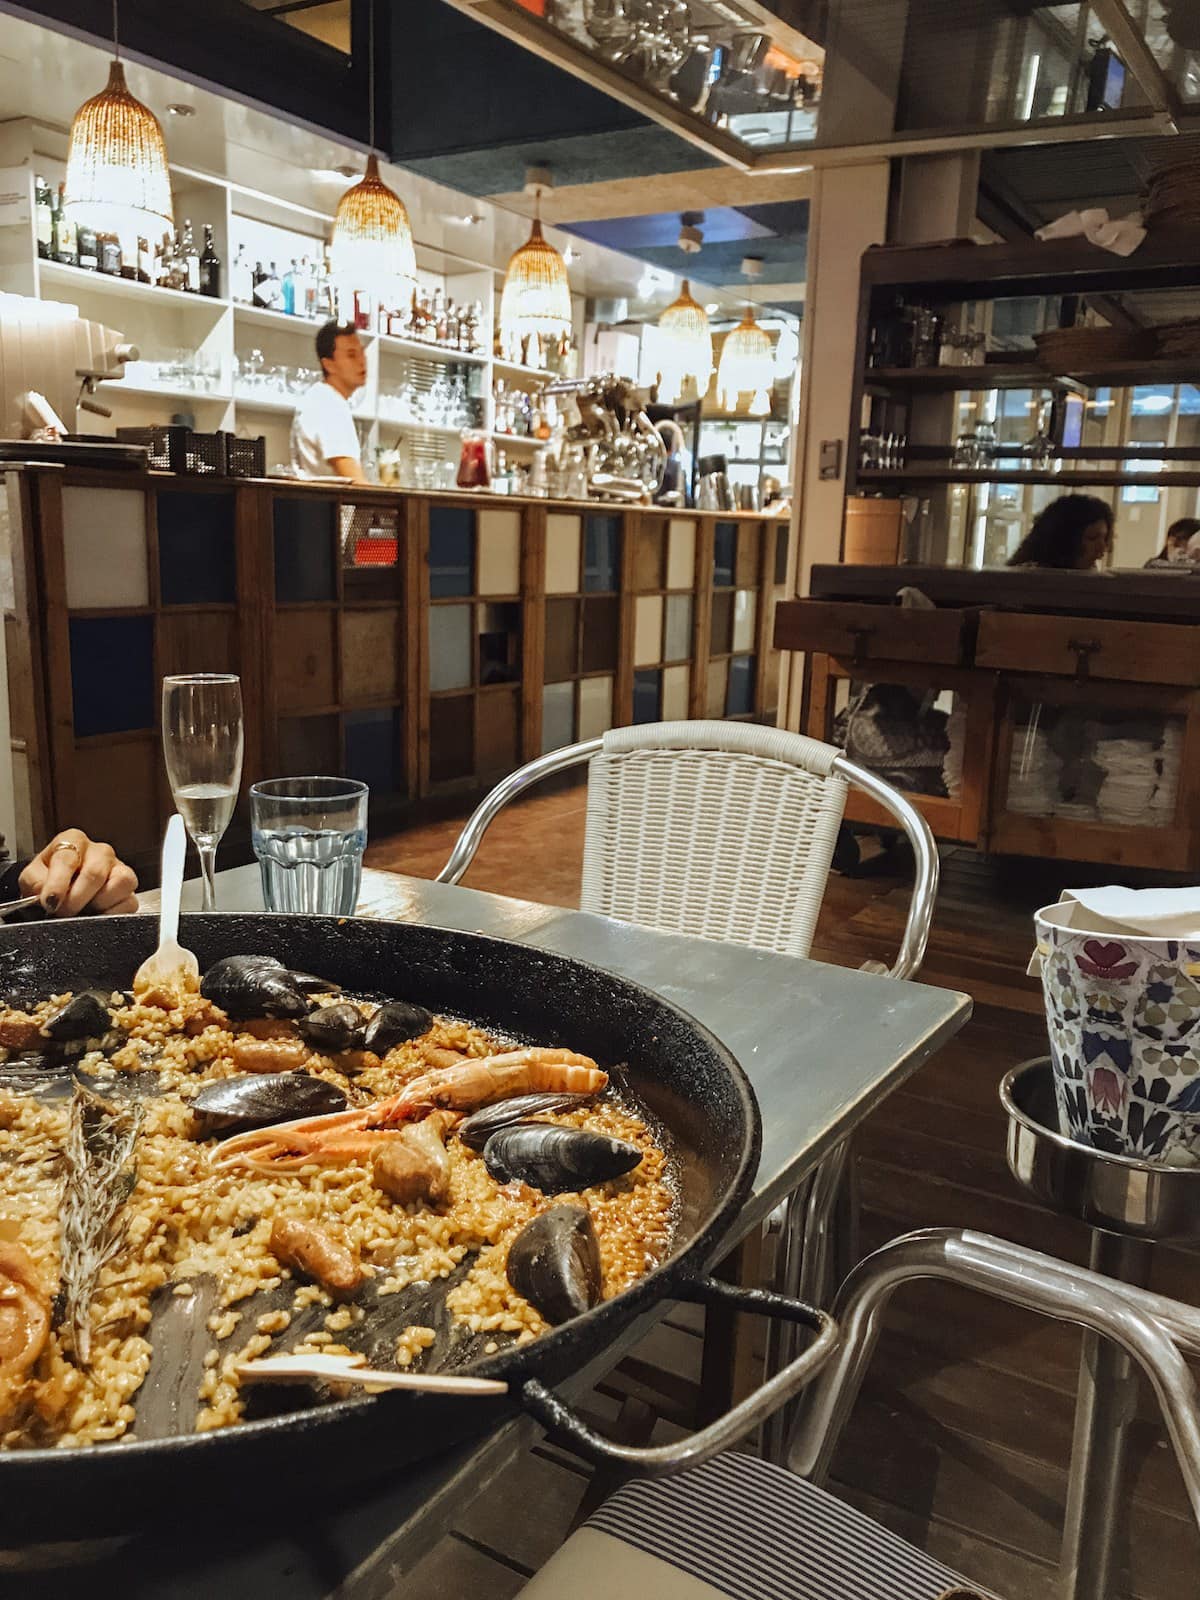 Where to Find the Best Food in Barcelona: Tapas, Pintxos, Churros & More!